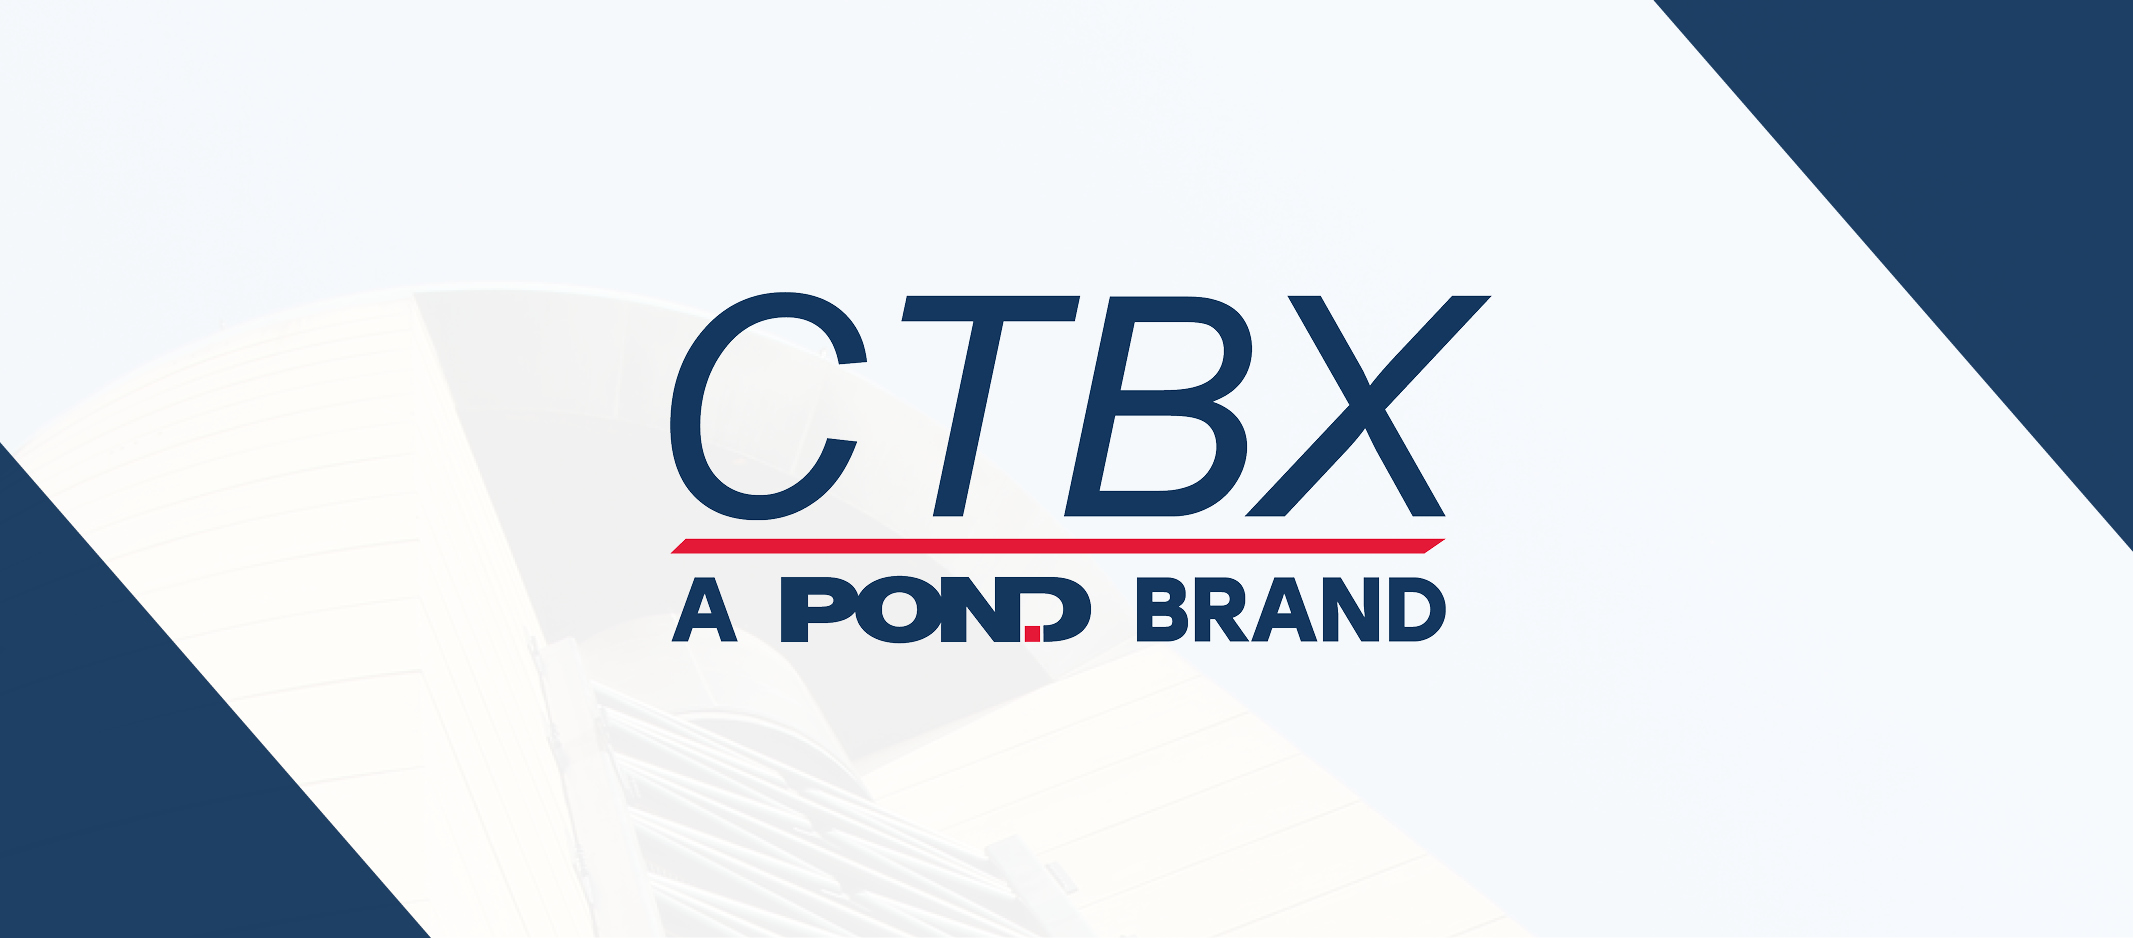 CTBX logo on top of white and blue background